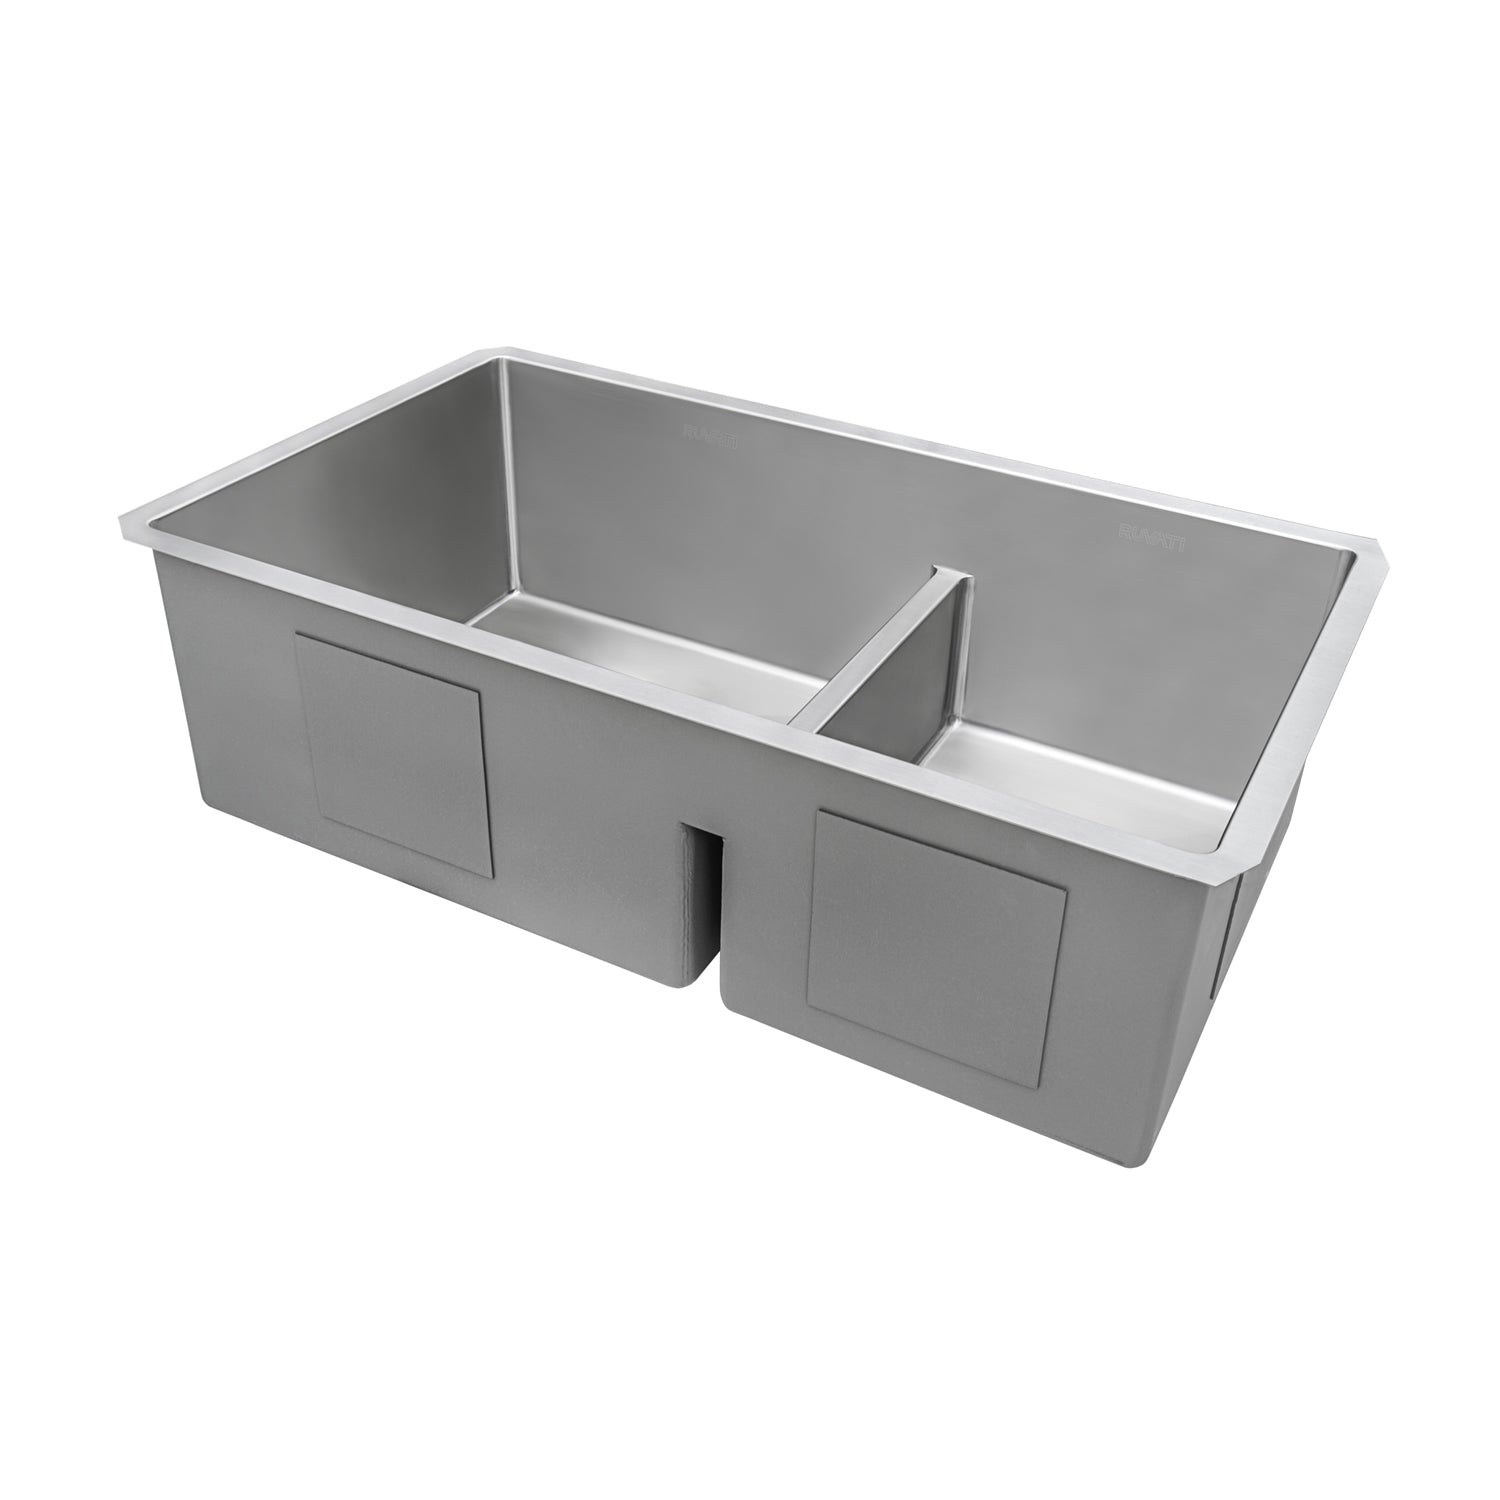 Ruvati Urbana 28” x 19" Undermount Stainless Steel 60/40 Double Bowl Low Divide Tight Radius Kitchen Sink With Basket Strainer, Bottom Rinse Grid and Drain Assembly